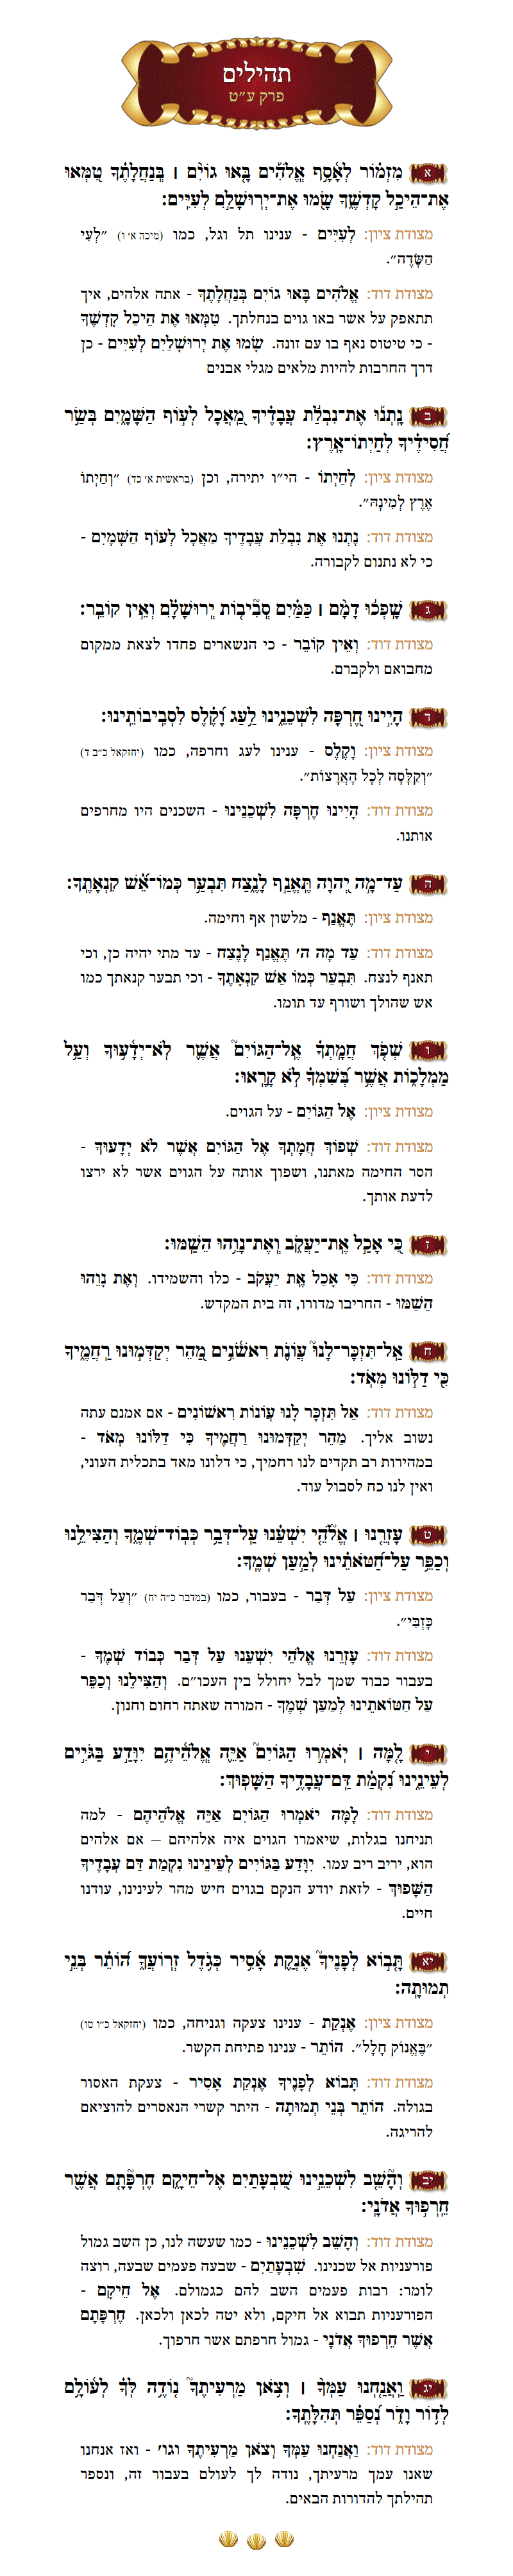 Sefer Tehillim Chapter 97 with commentary